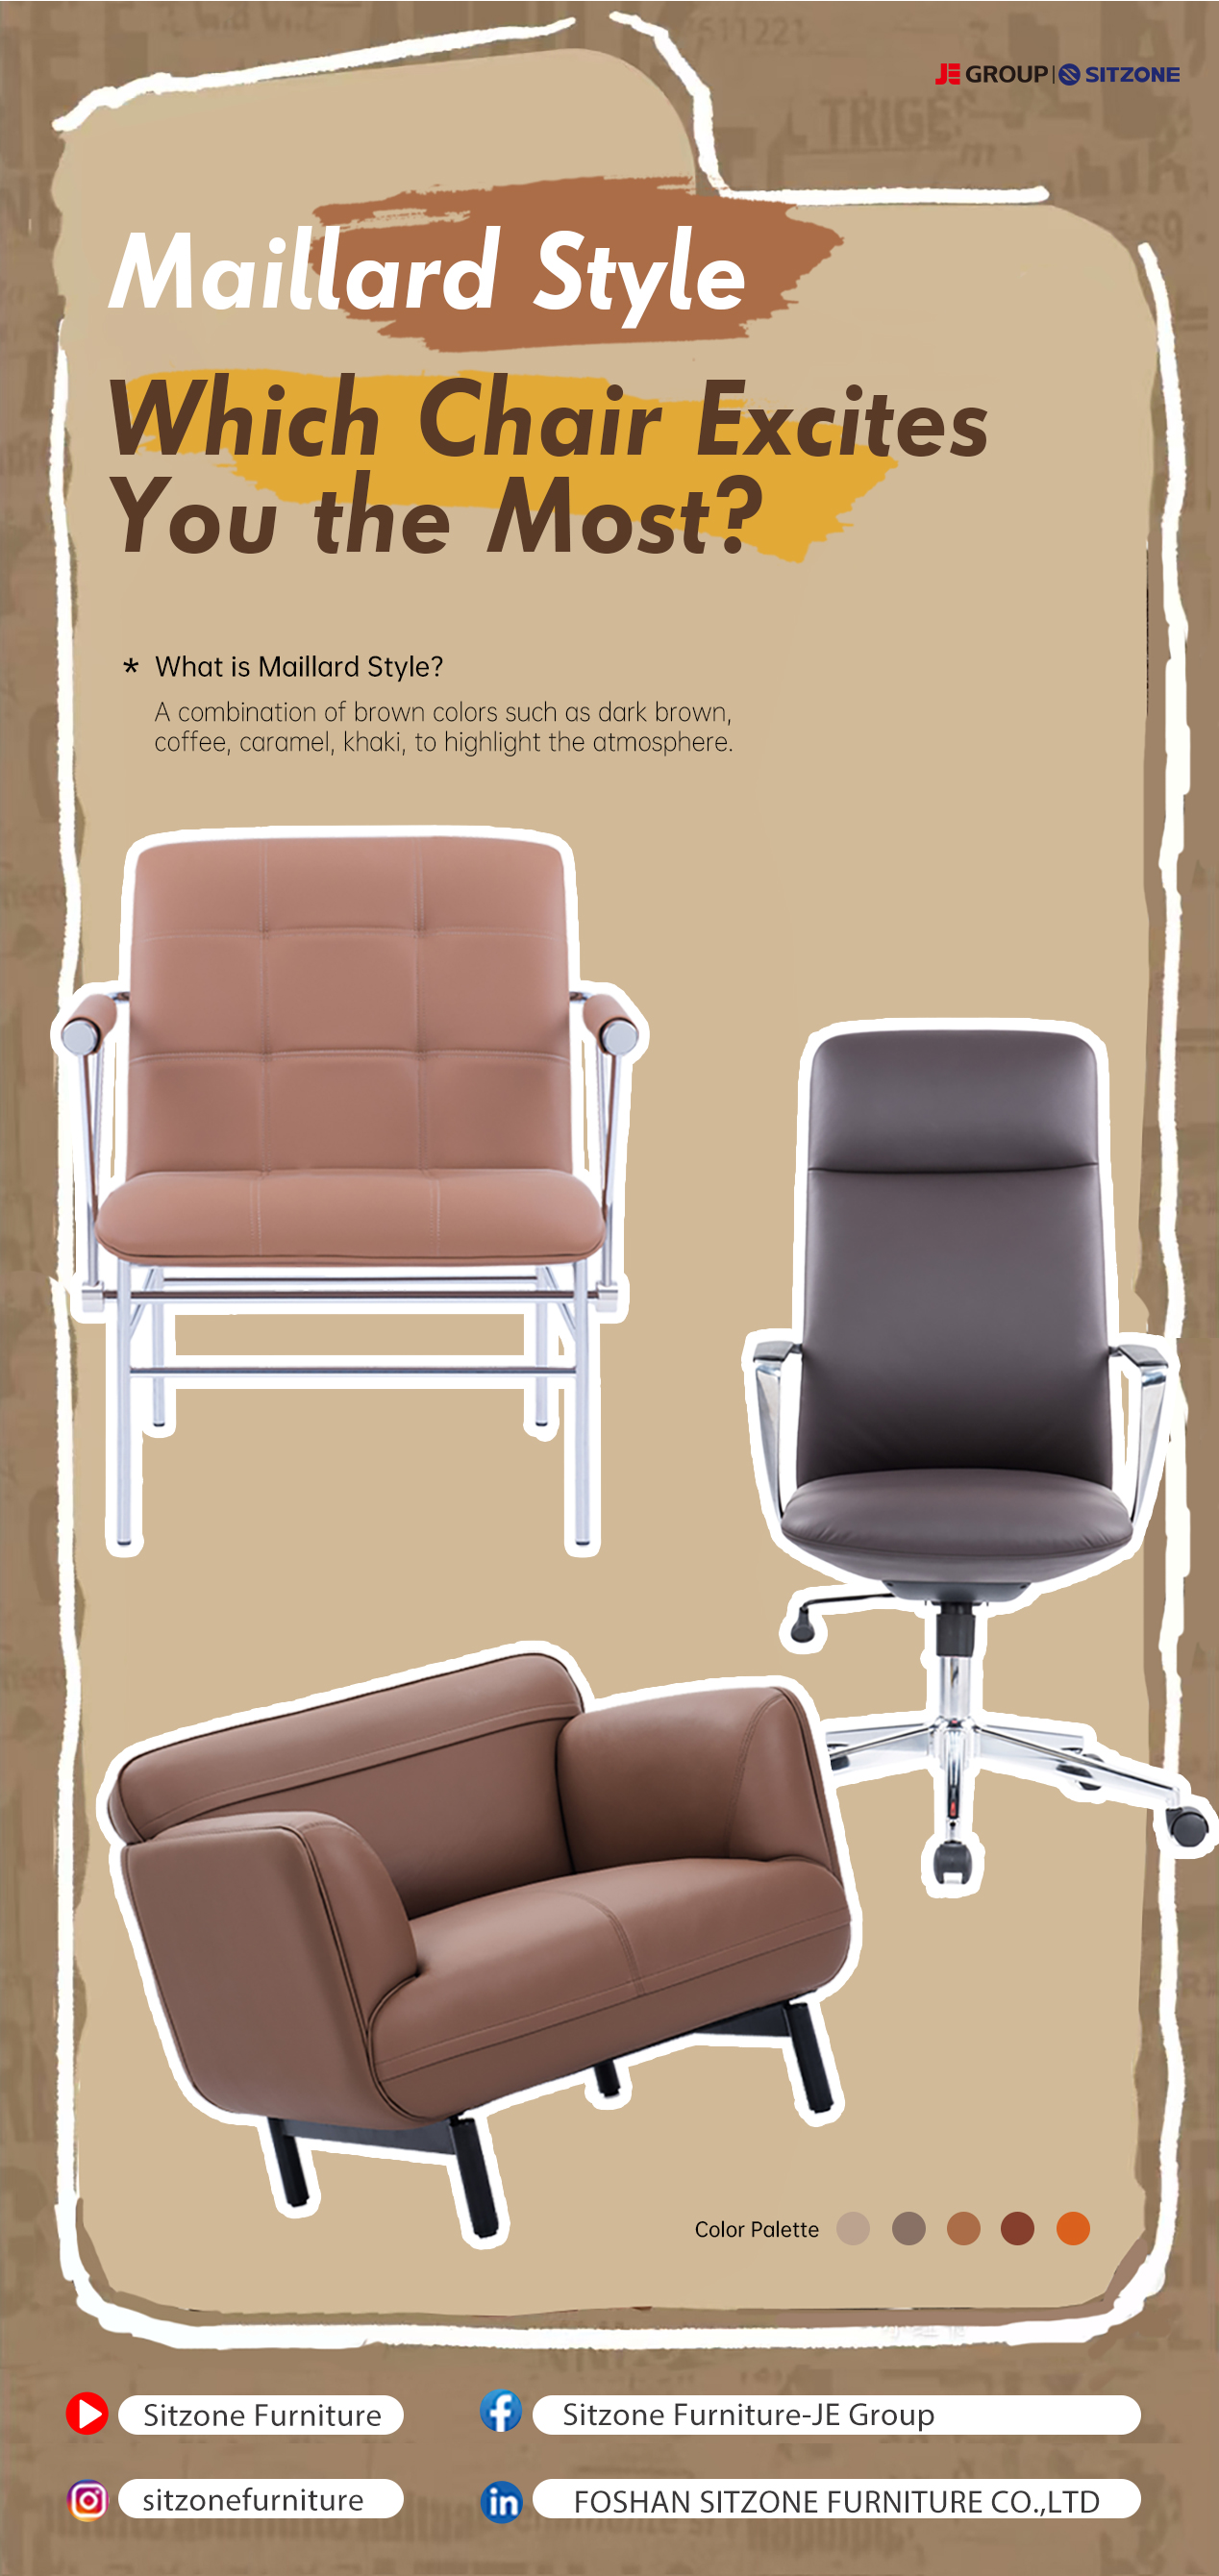 Maillard Style | Which Chair Excites You the Most?